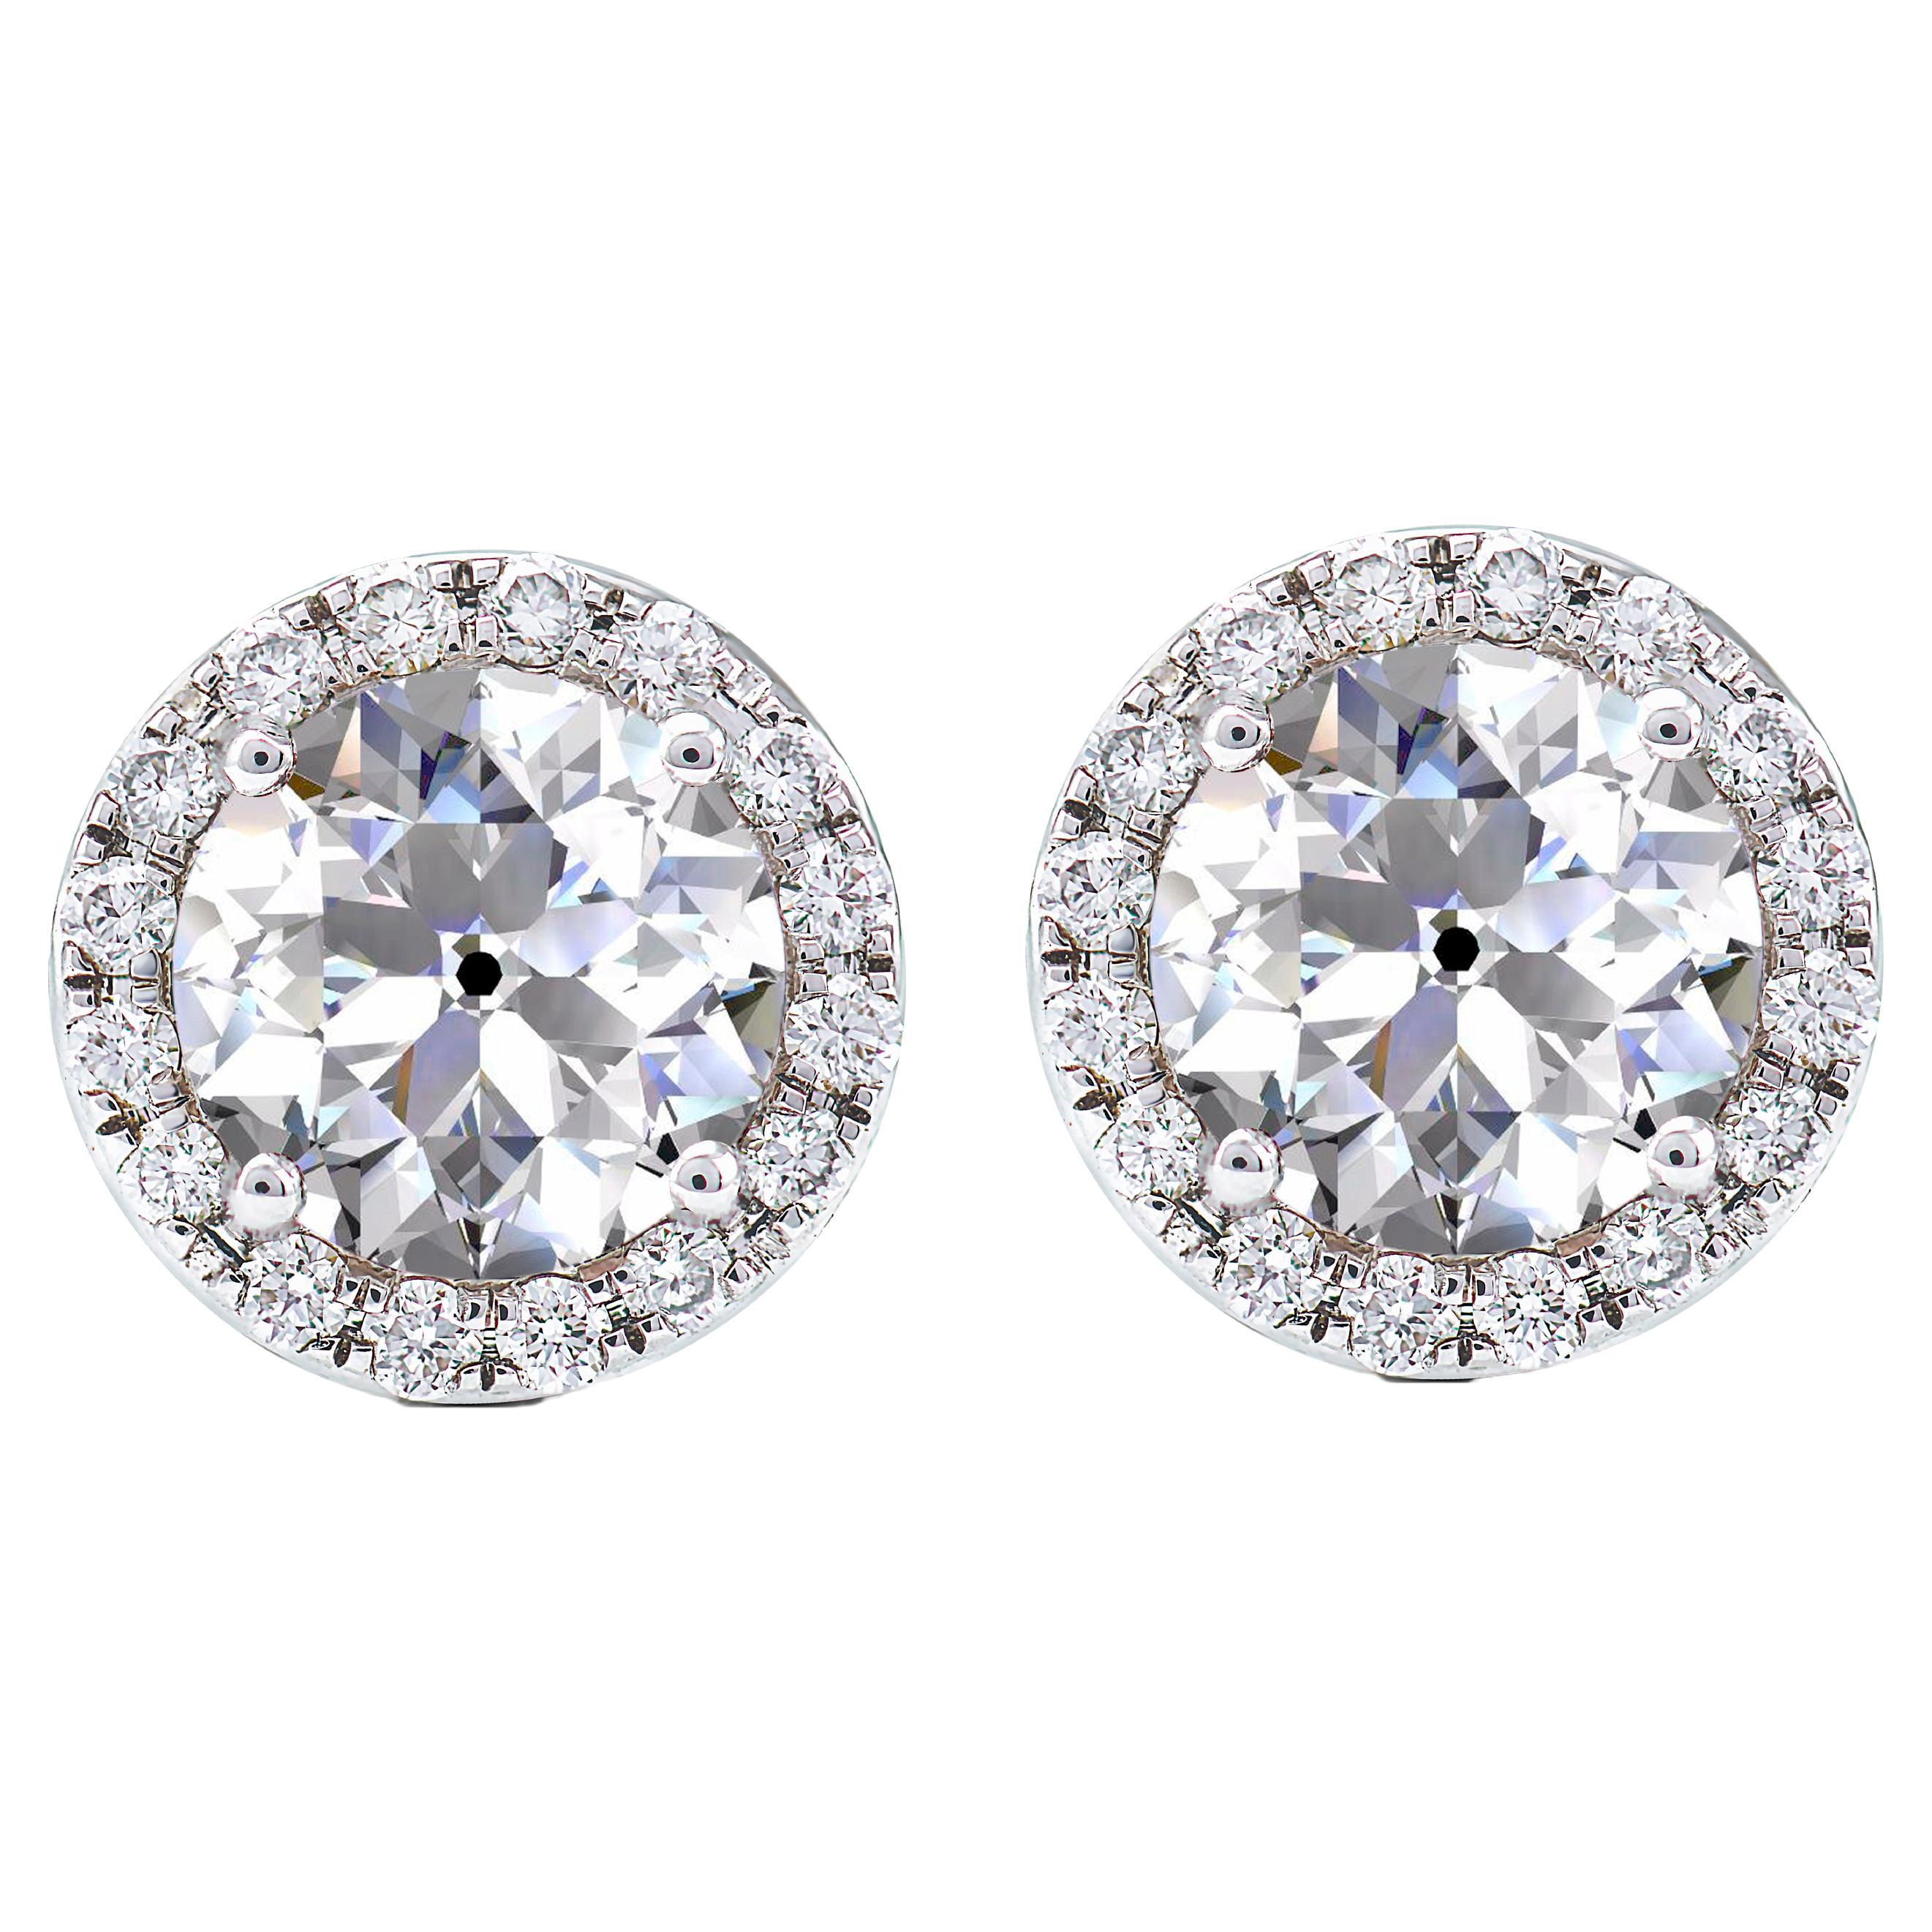 18k Gold 1.38 ct Old Mine Cut Diamond Halo Earrings Studs Contemporary Settings